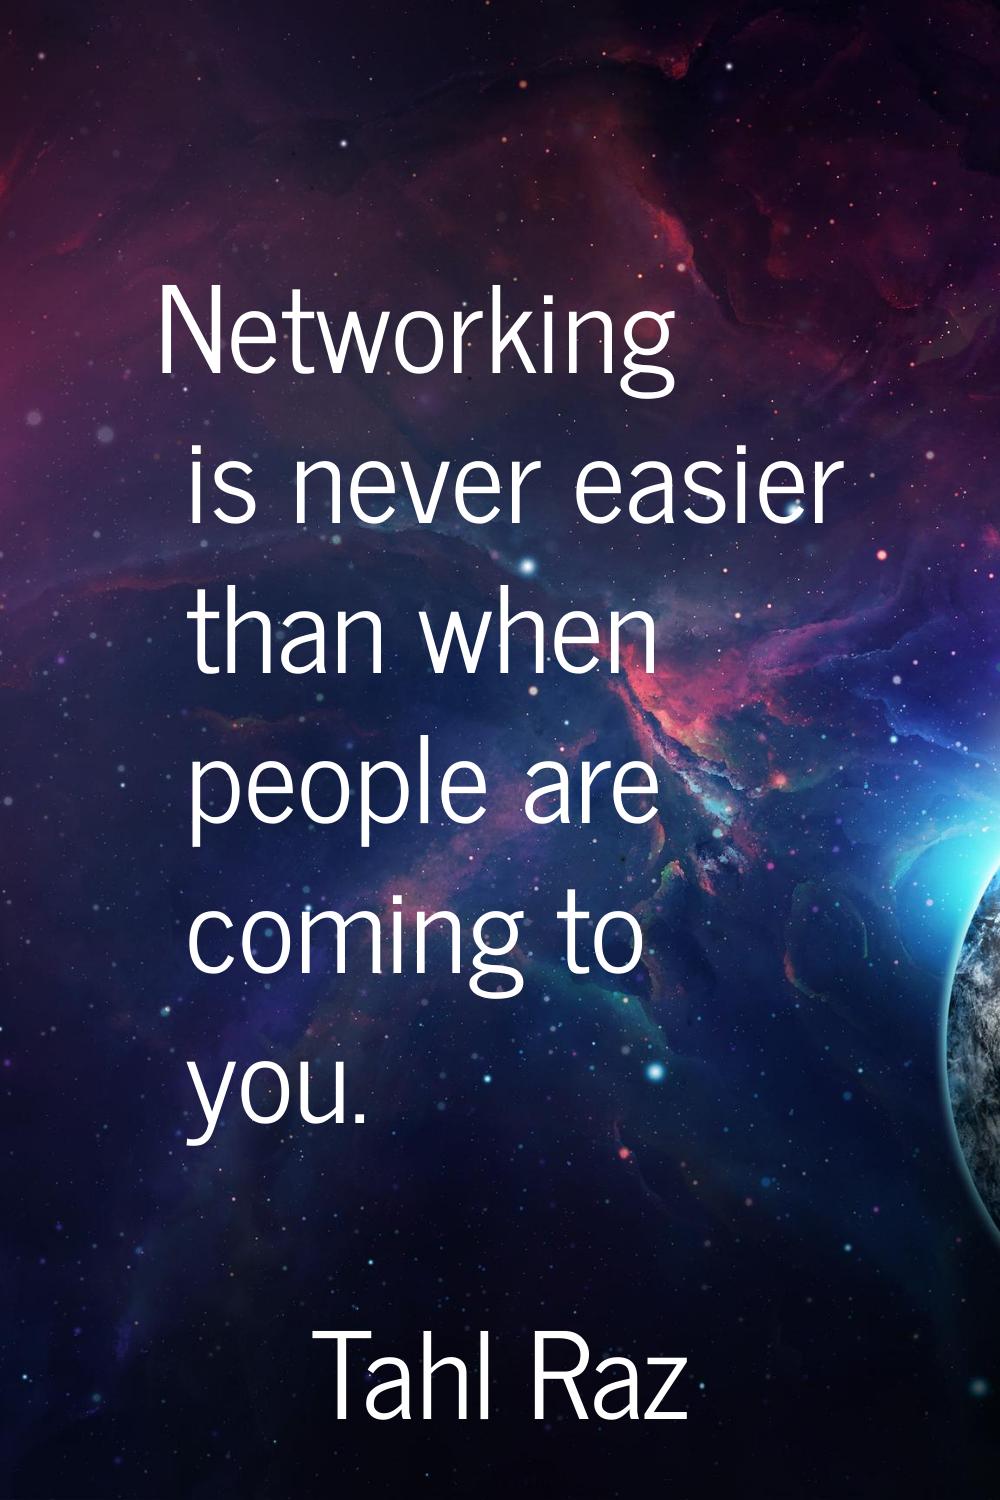 Networking is never easier than when people are coming to you.